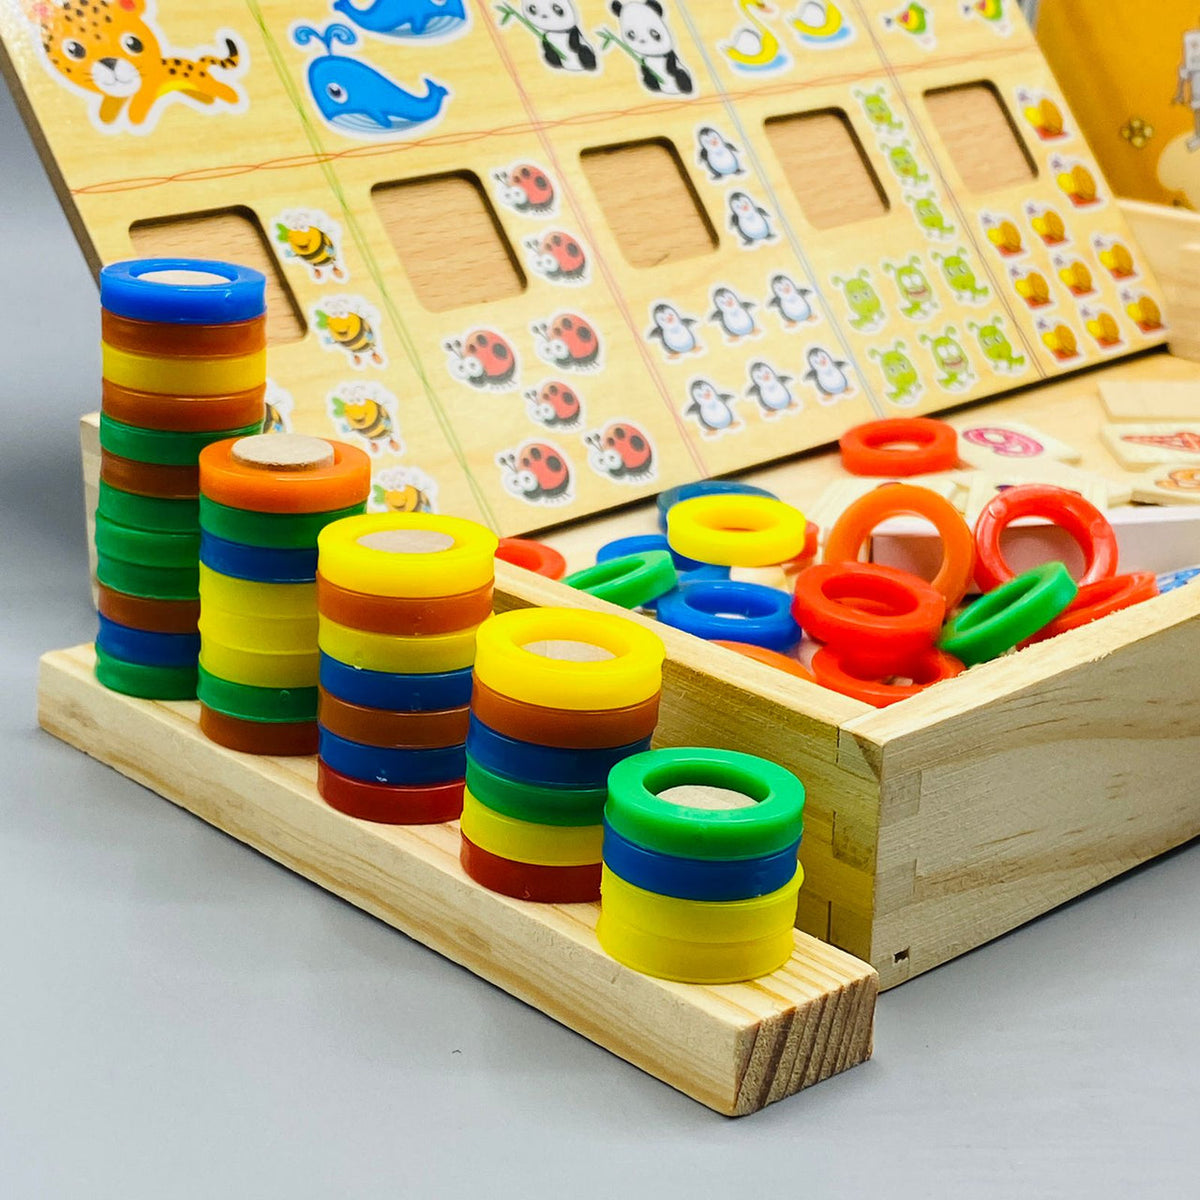 Multifunctional Wooden Donut Arithmetic Counting Stick learning box For Kids